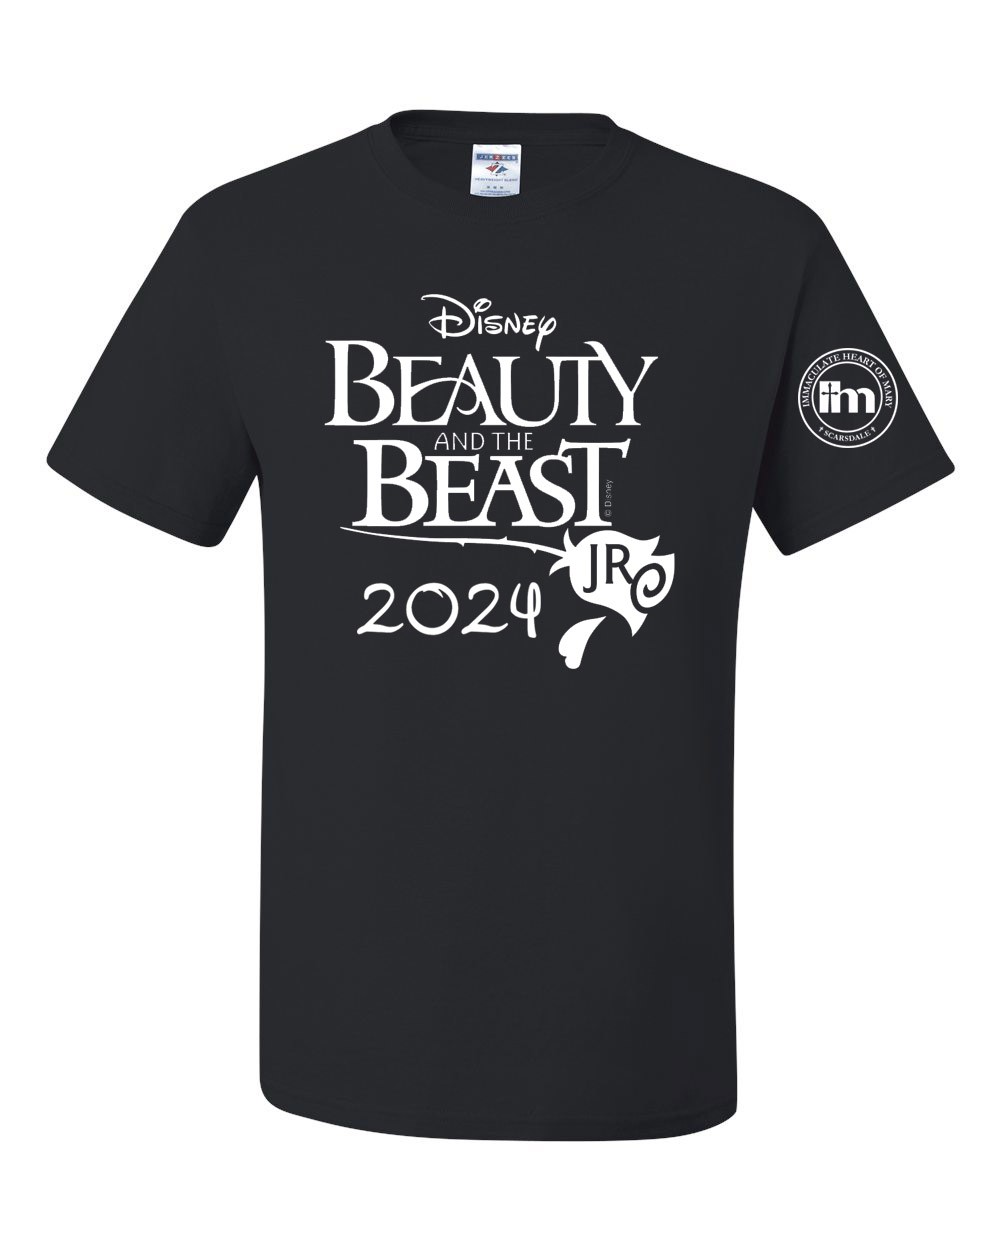 IHM Beauty and the Beast S/S T-shirt w/ White Logo - Please Allow 2-3 Weeks for Delivery